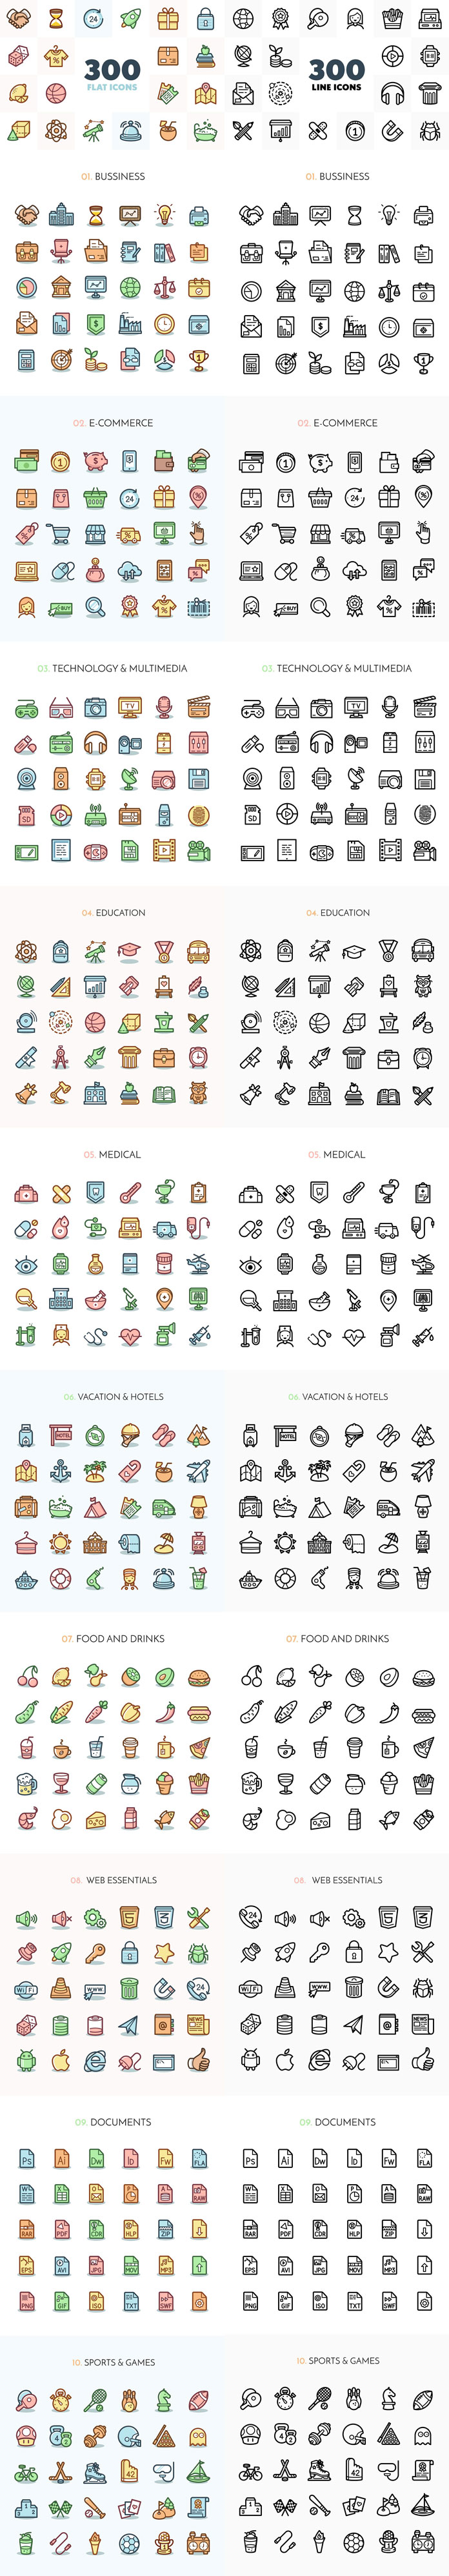 600 flat icons in two styles.